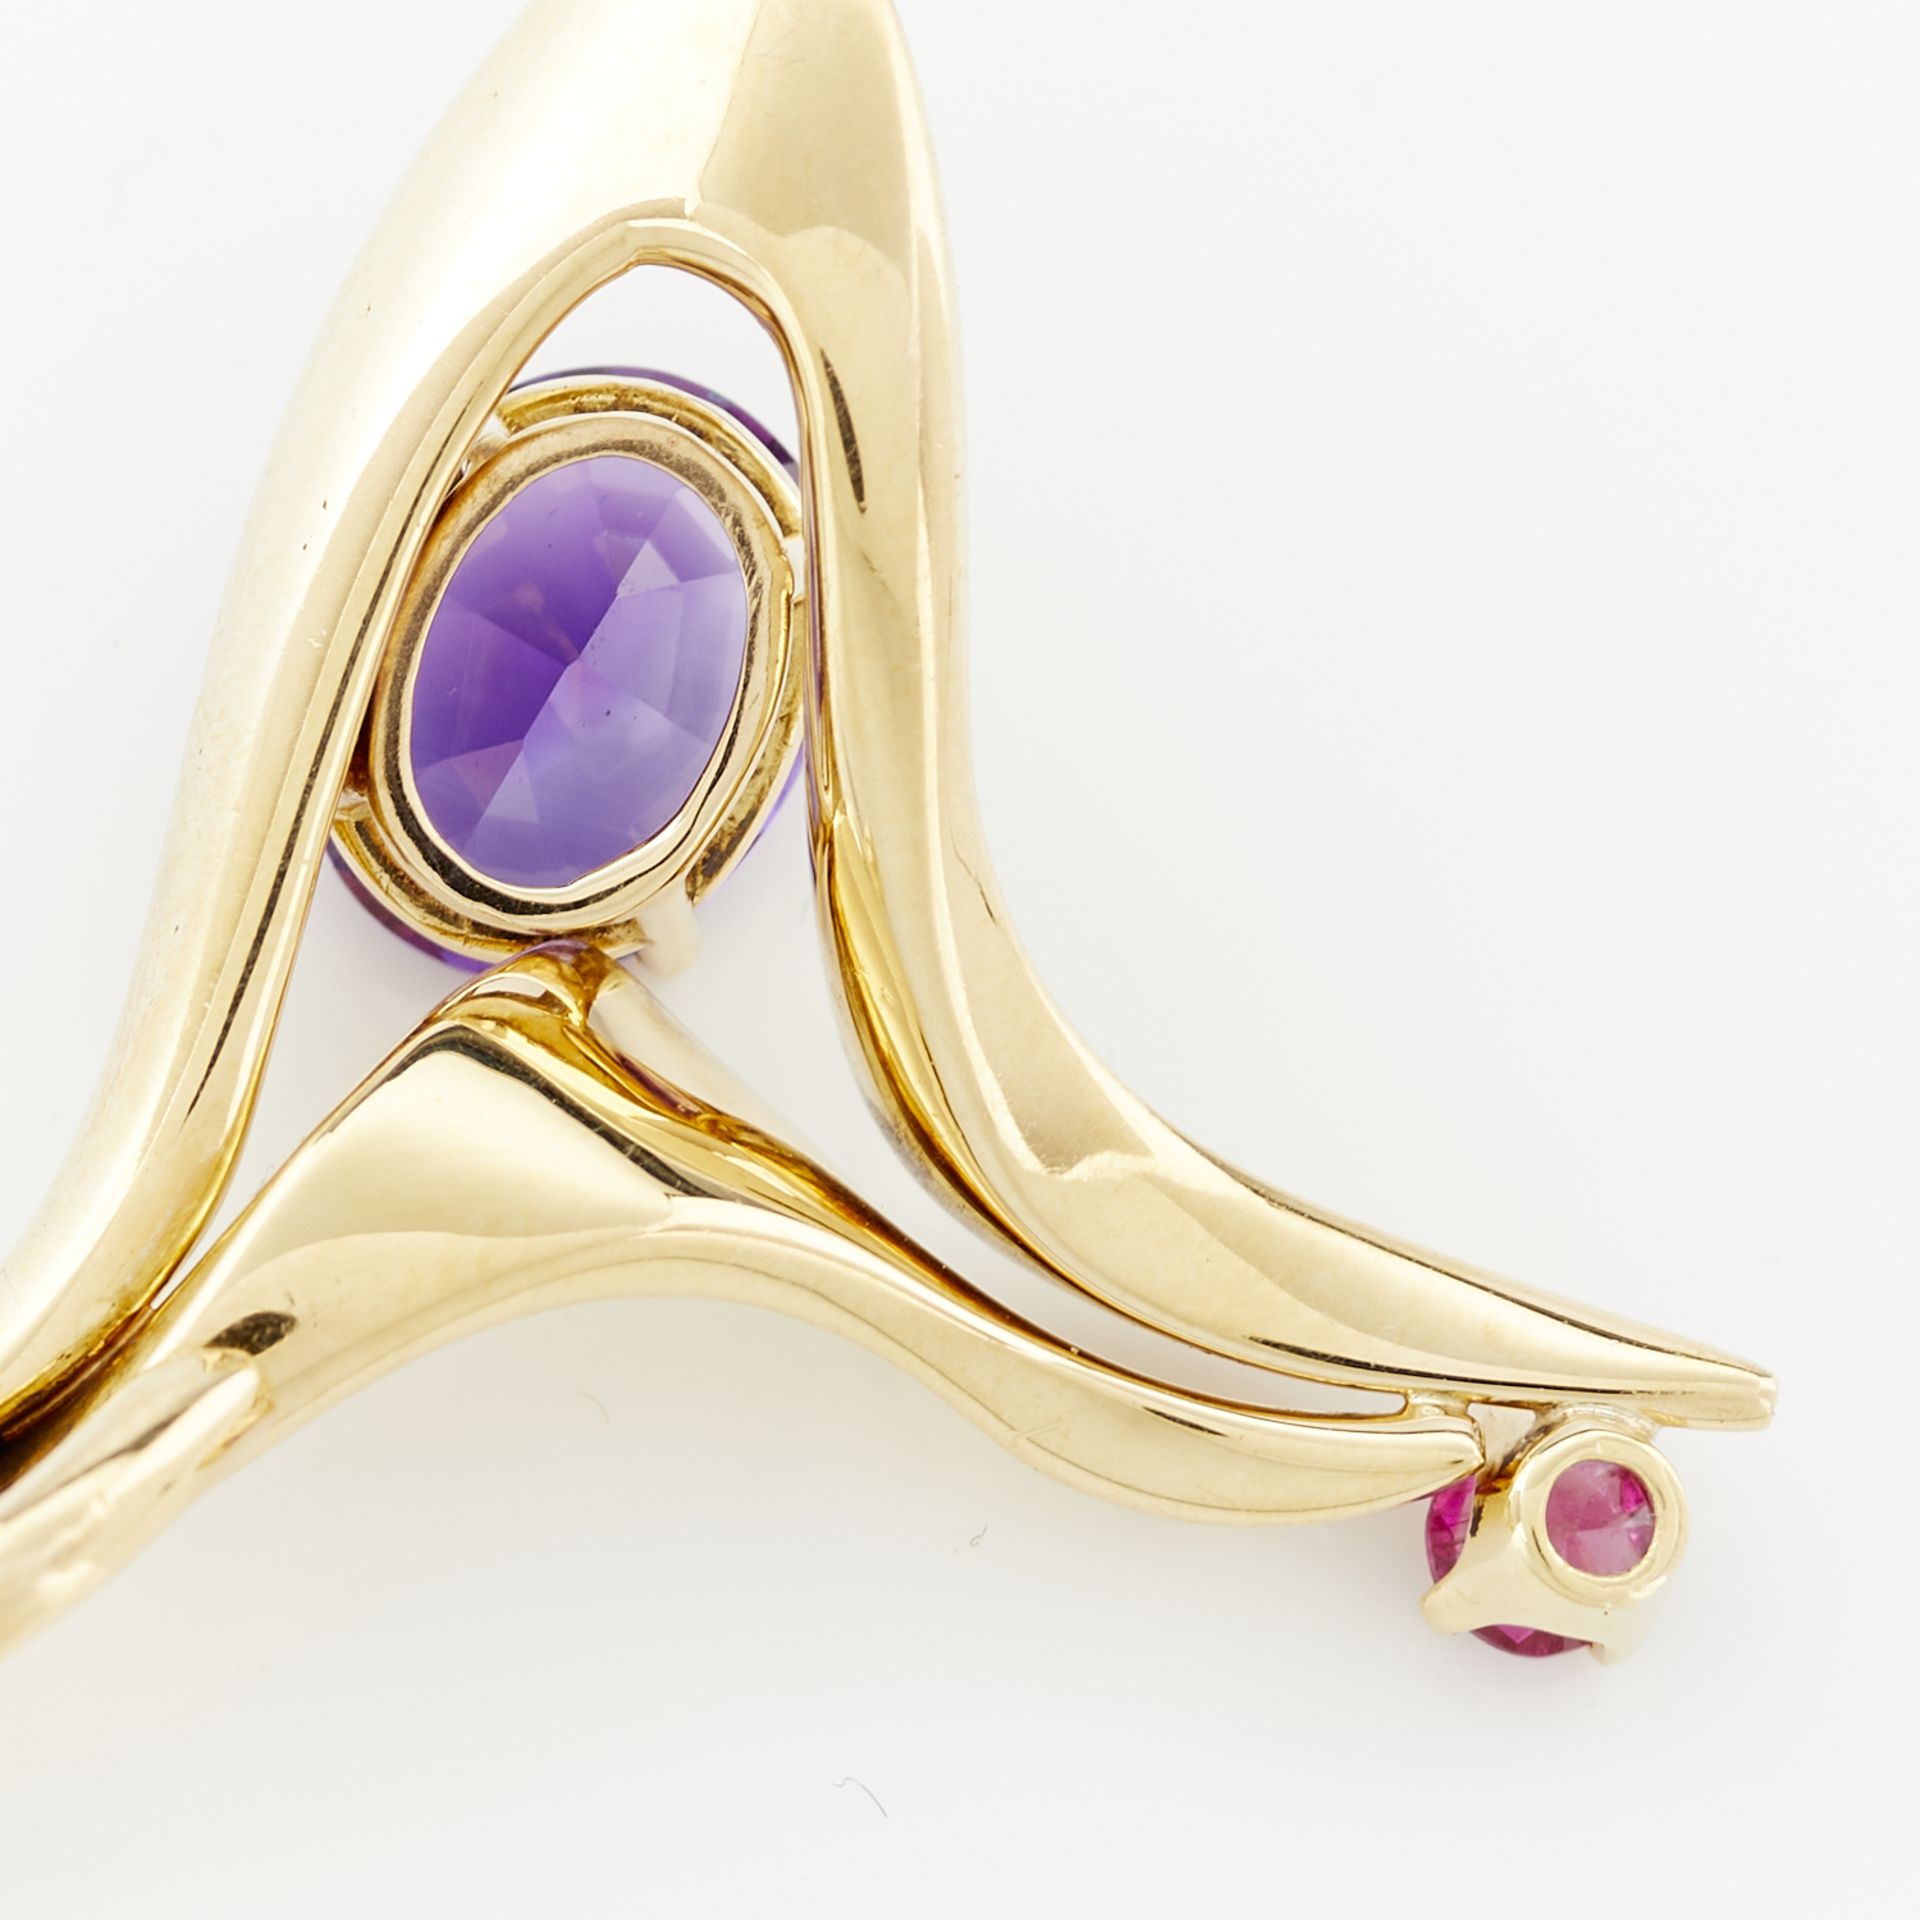 18k Gold Pendant with Amethyst & Citrine - Image 6 of 6